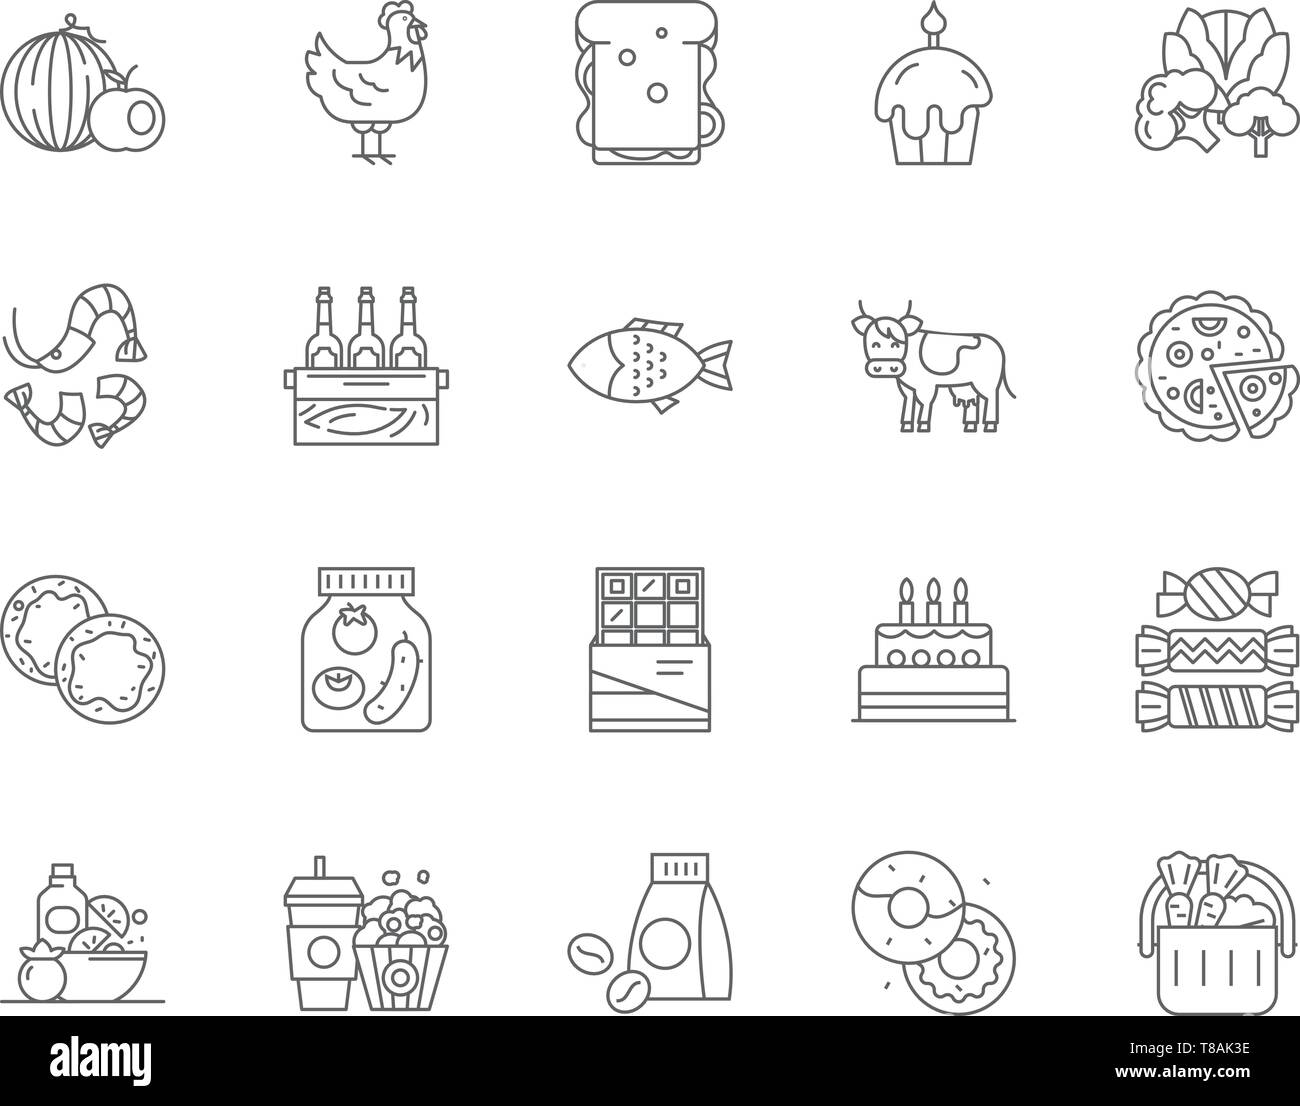 Food production line icons, signs, vector set, outline illustration concept  Stock Vector